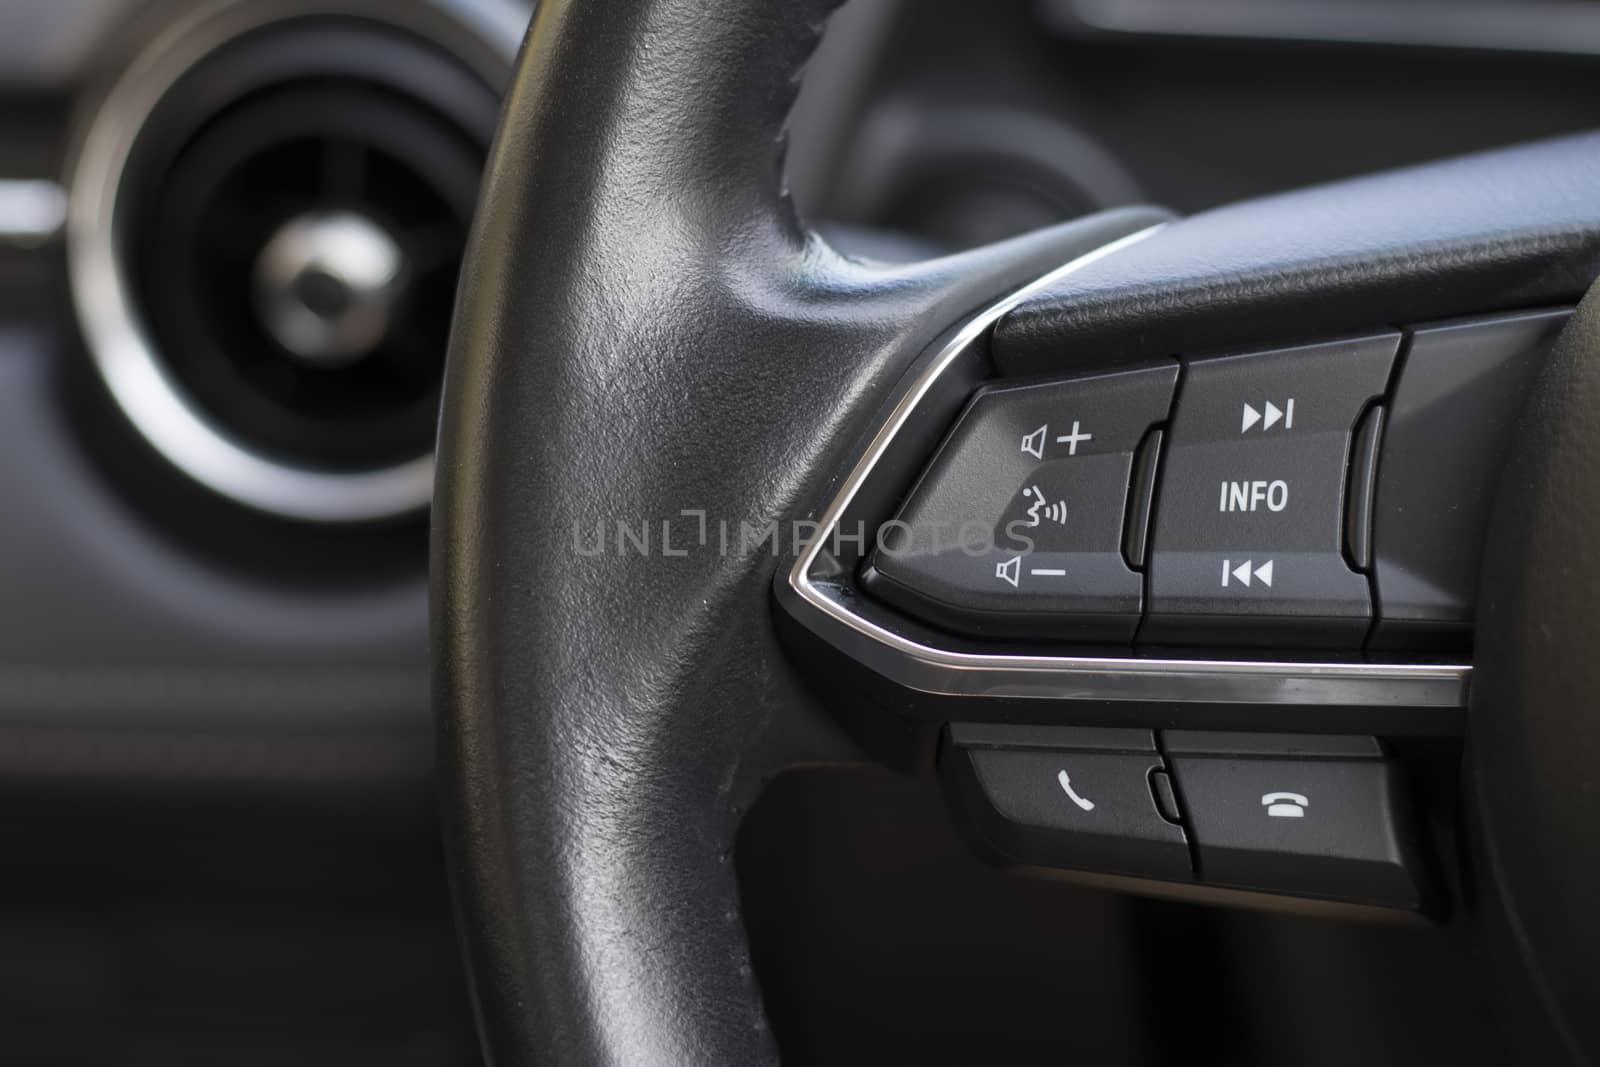 Control panel at the steering wheel for control the use of various applications in the car. by Eungsuwat